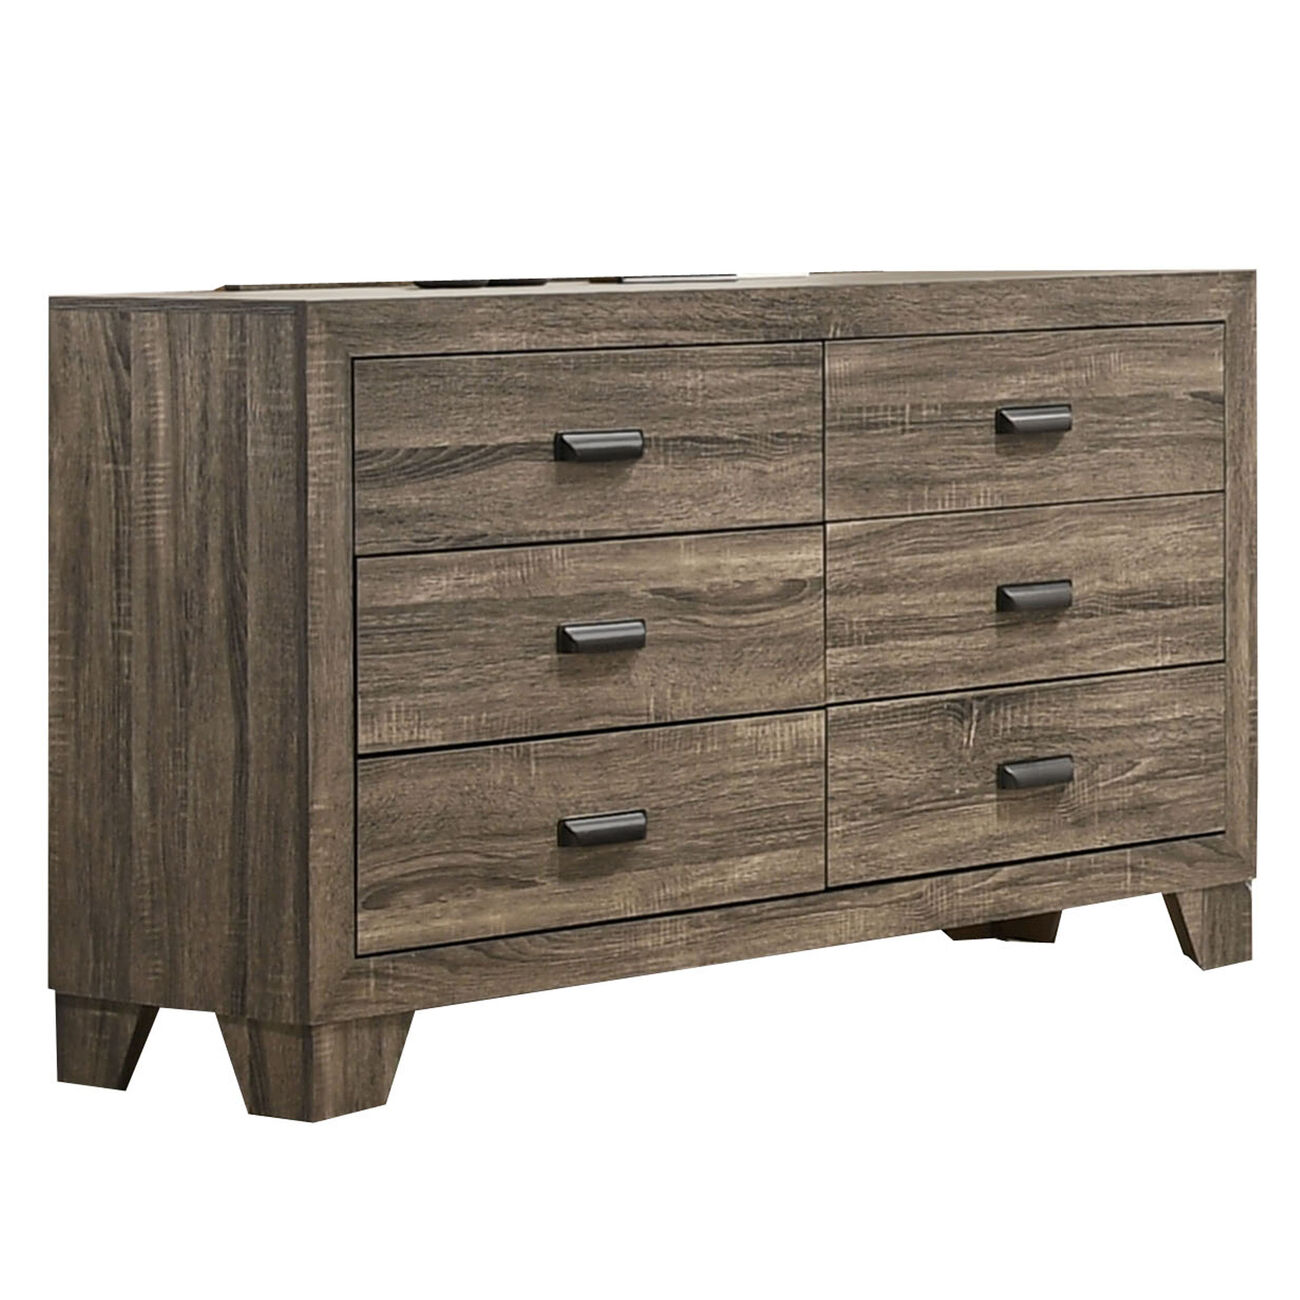 6 Drawer Wooden Dresser with Metal Pulls and Tapered Legs, Brown